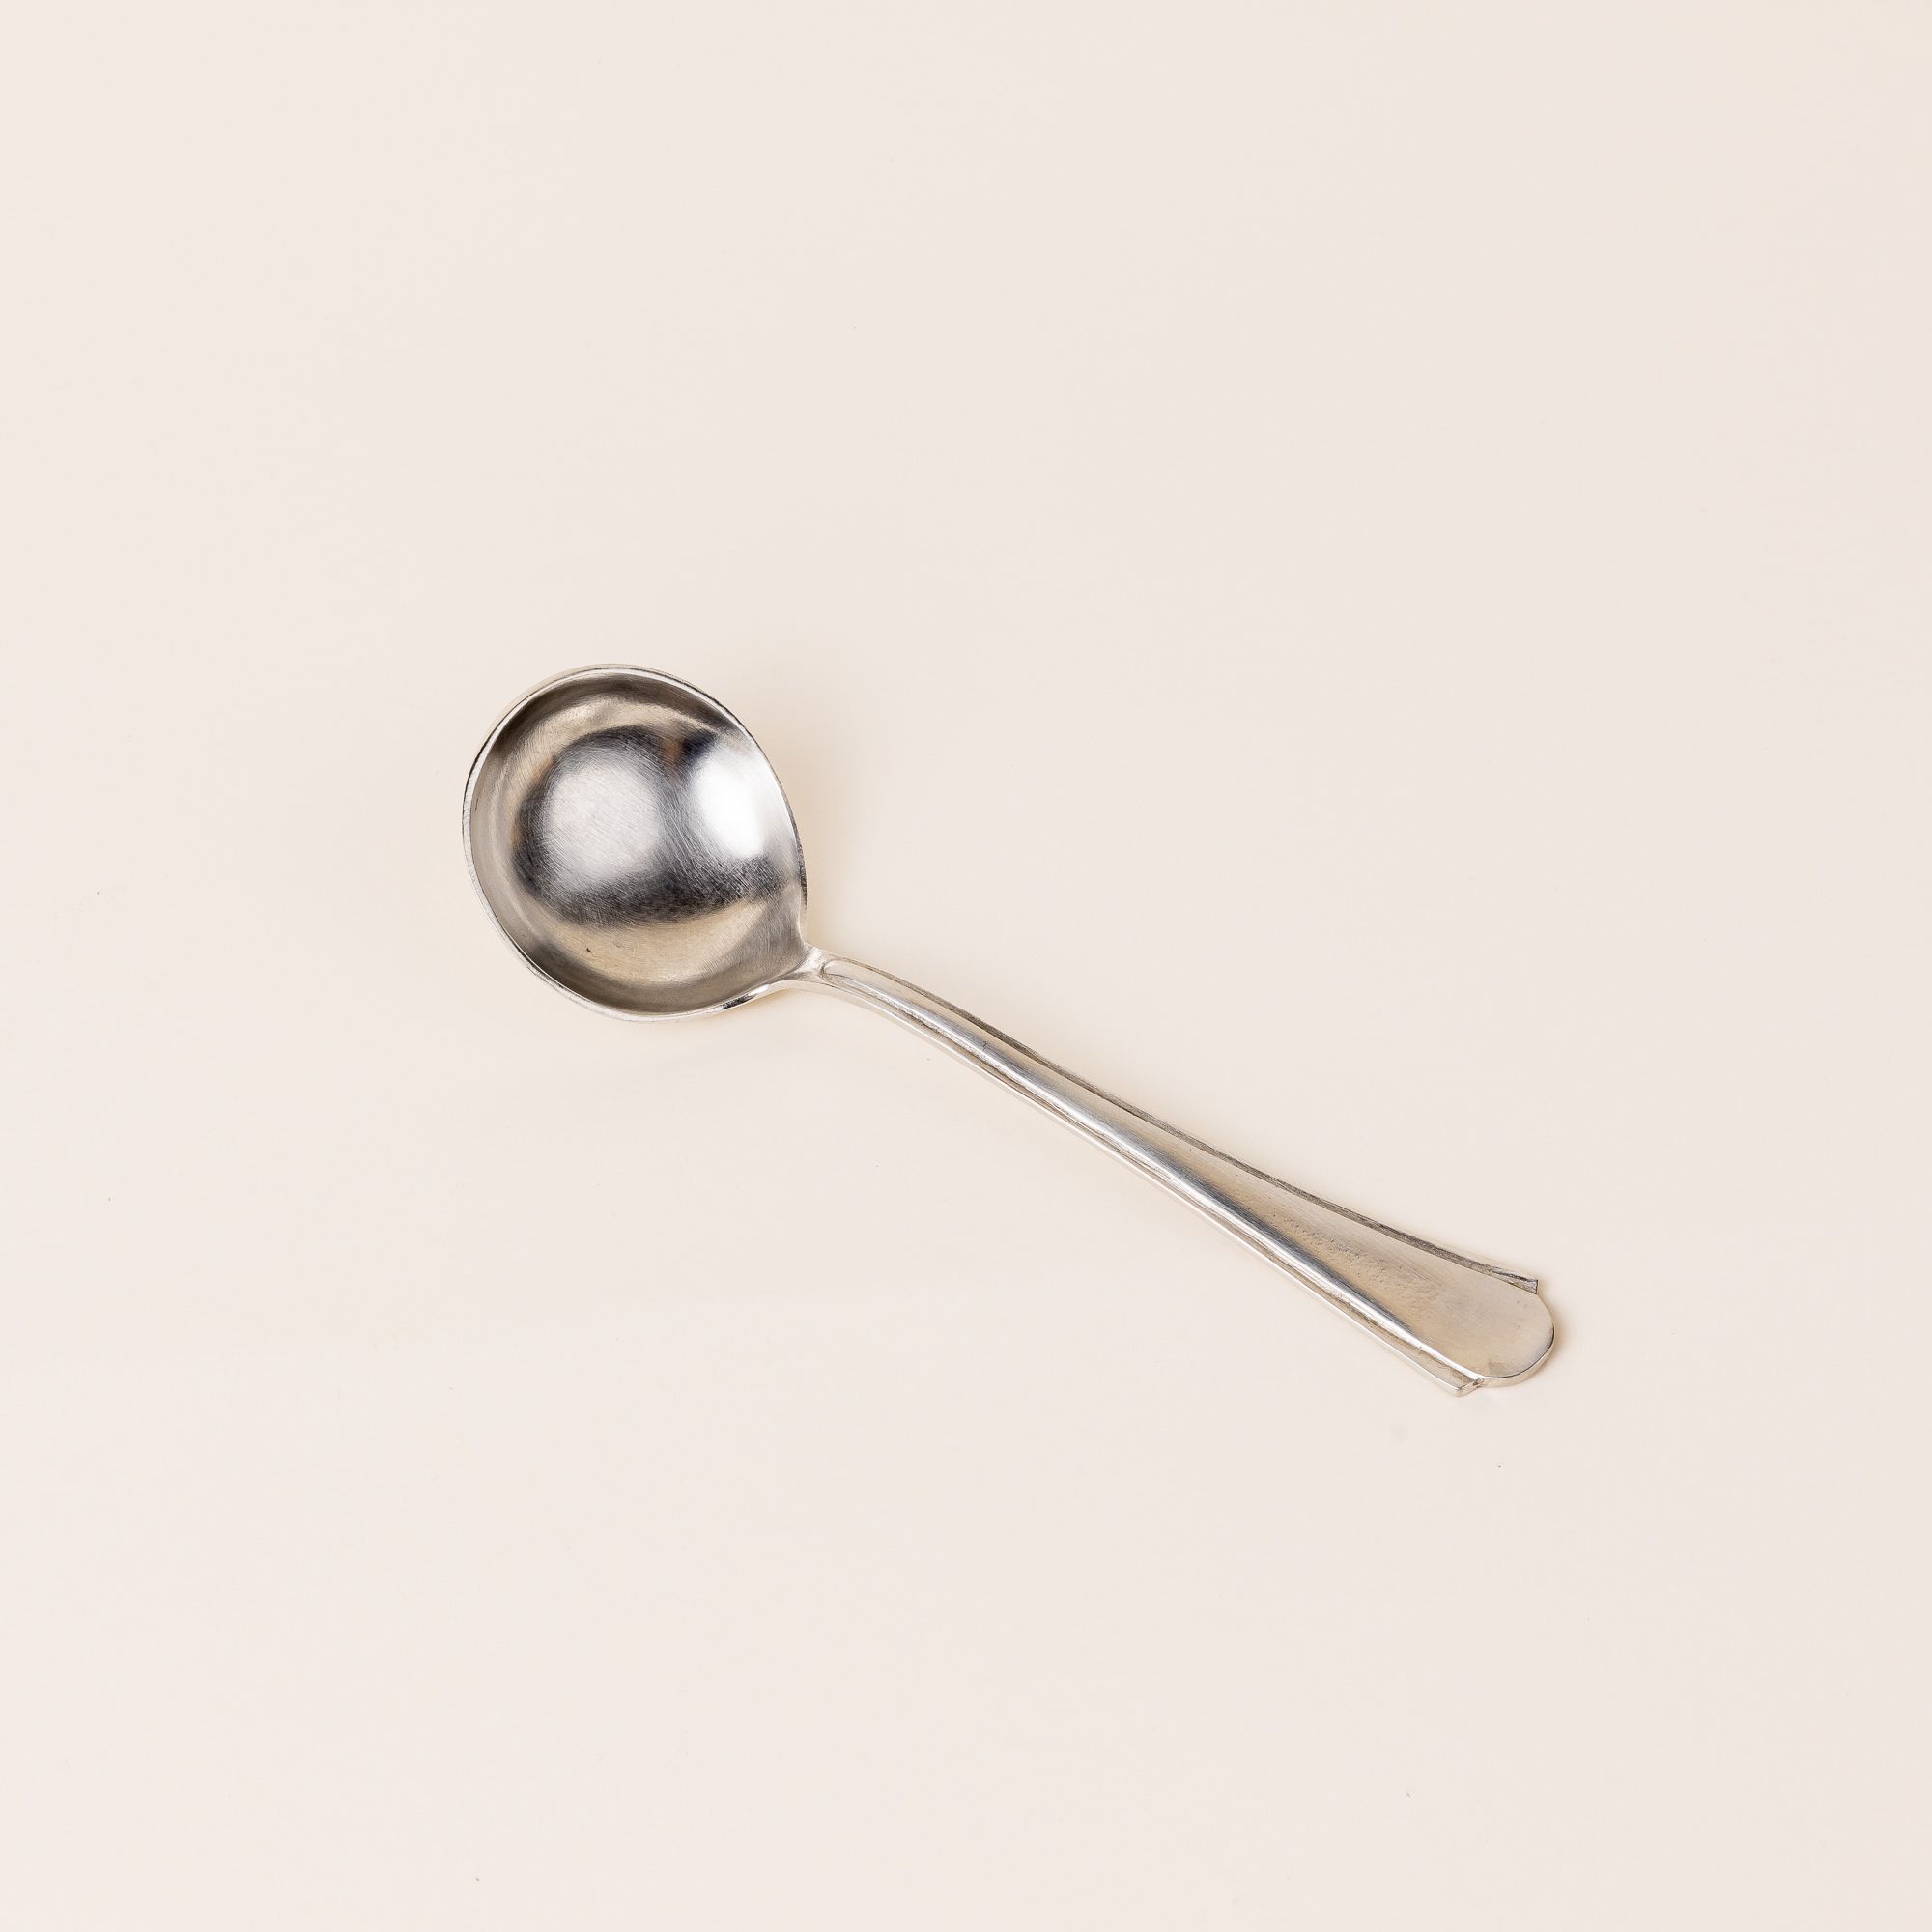 A silver spoon with a skinny handle that gets a little wider and round on the end. The bowl of a spoon is circular.